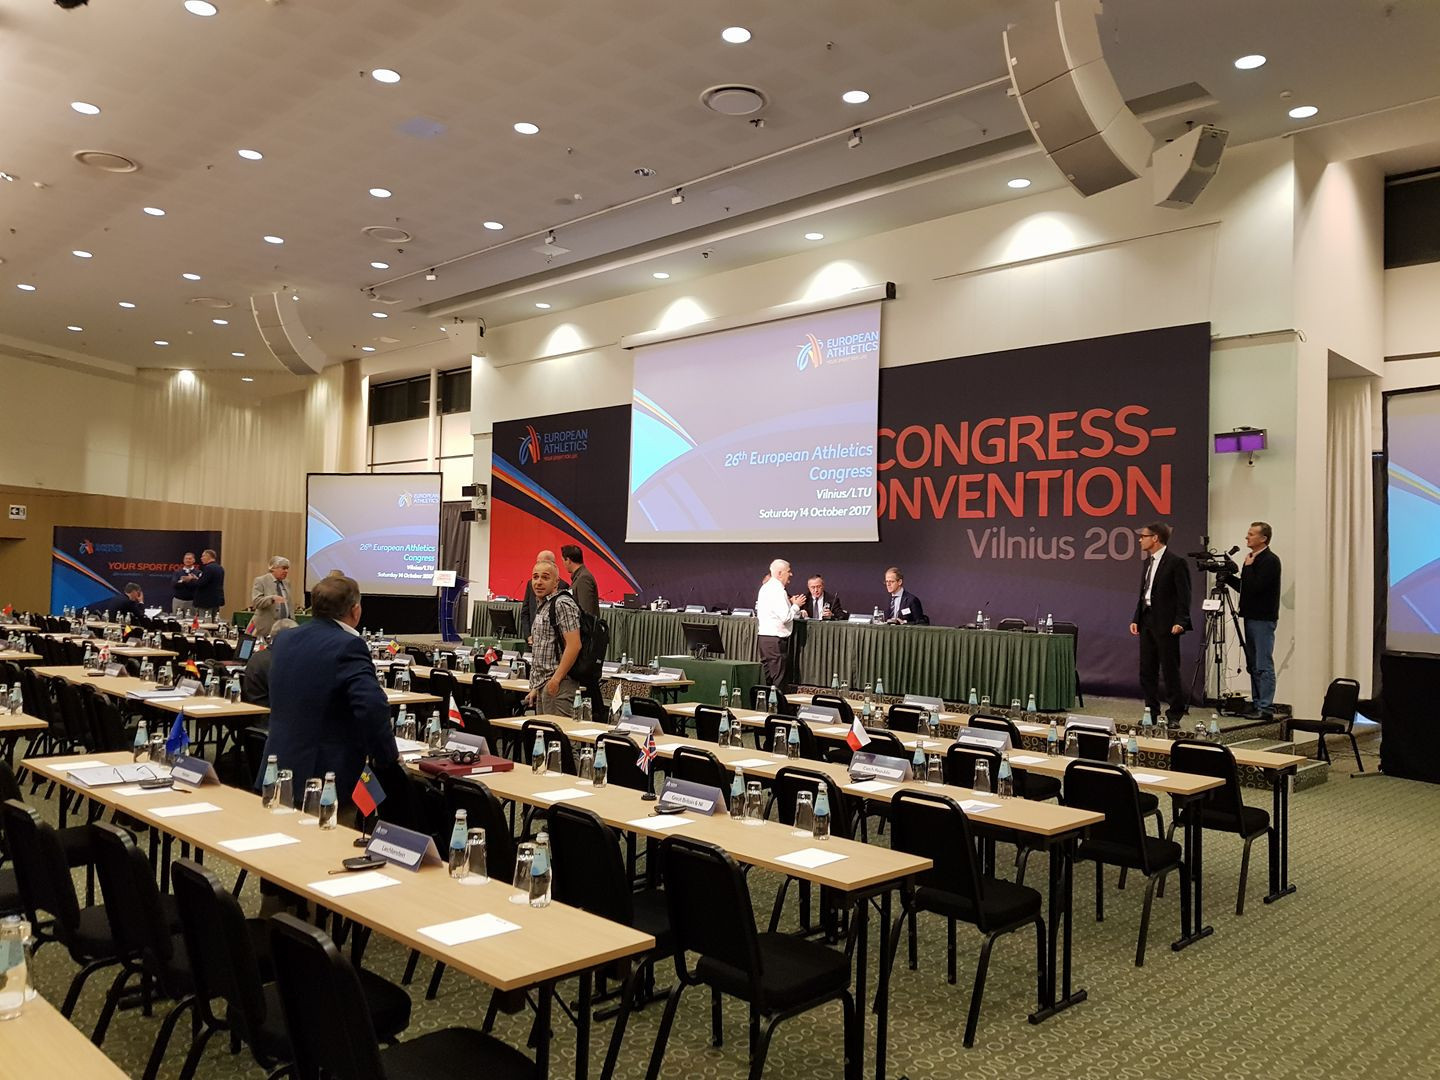 insidethegames is reporting LIVE from the European Athletics Convention and Congress in Vilnius